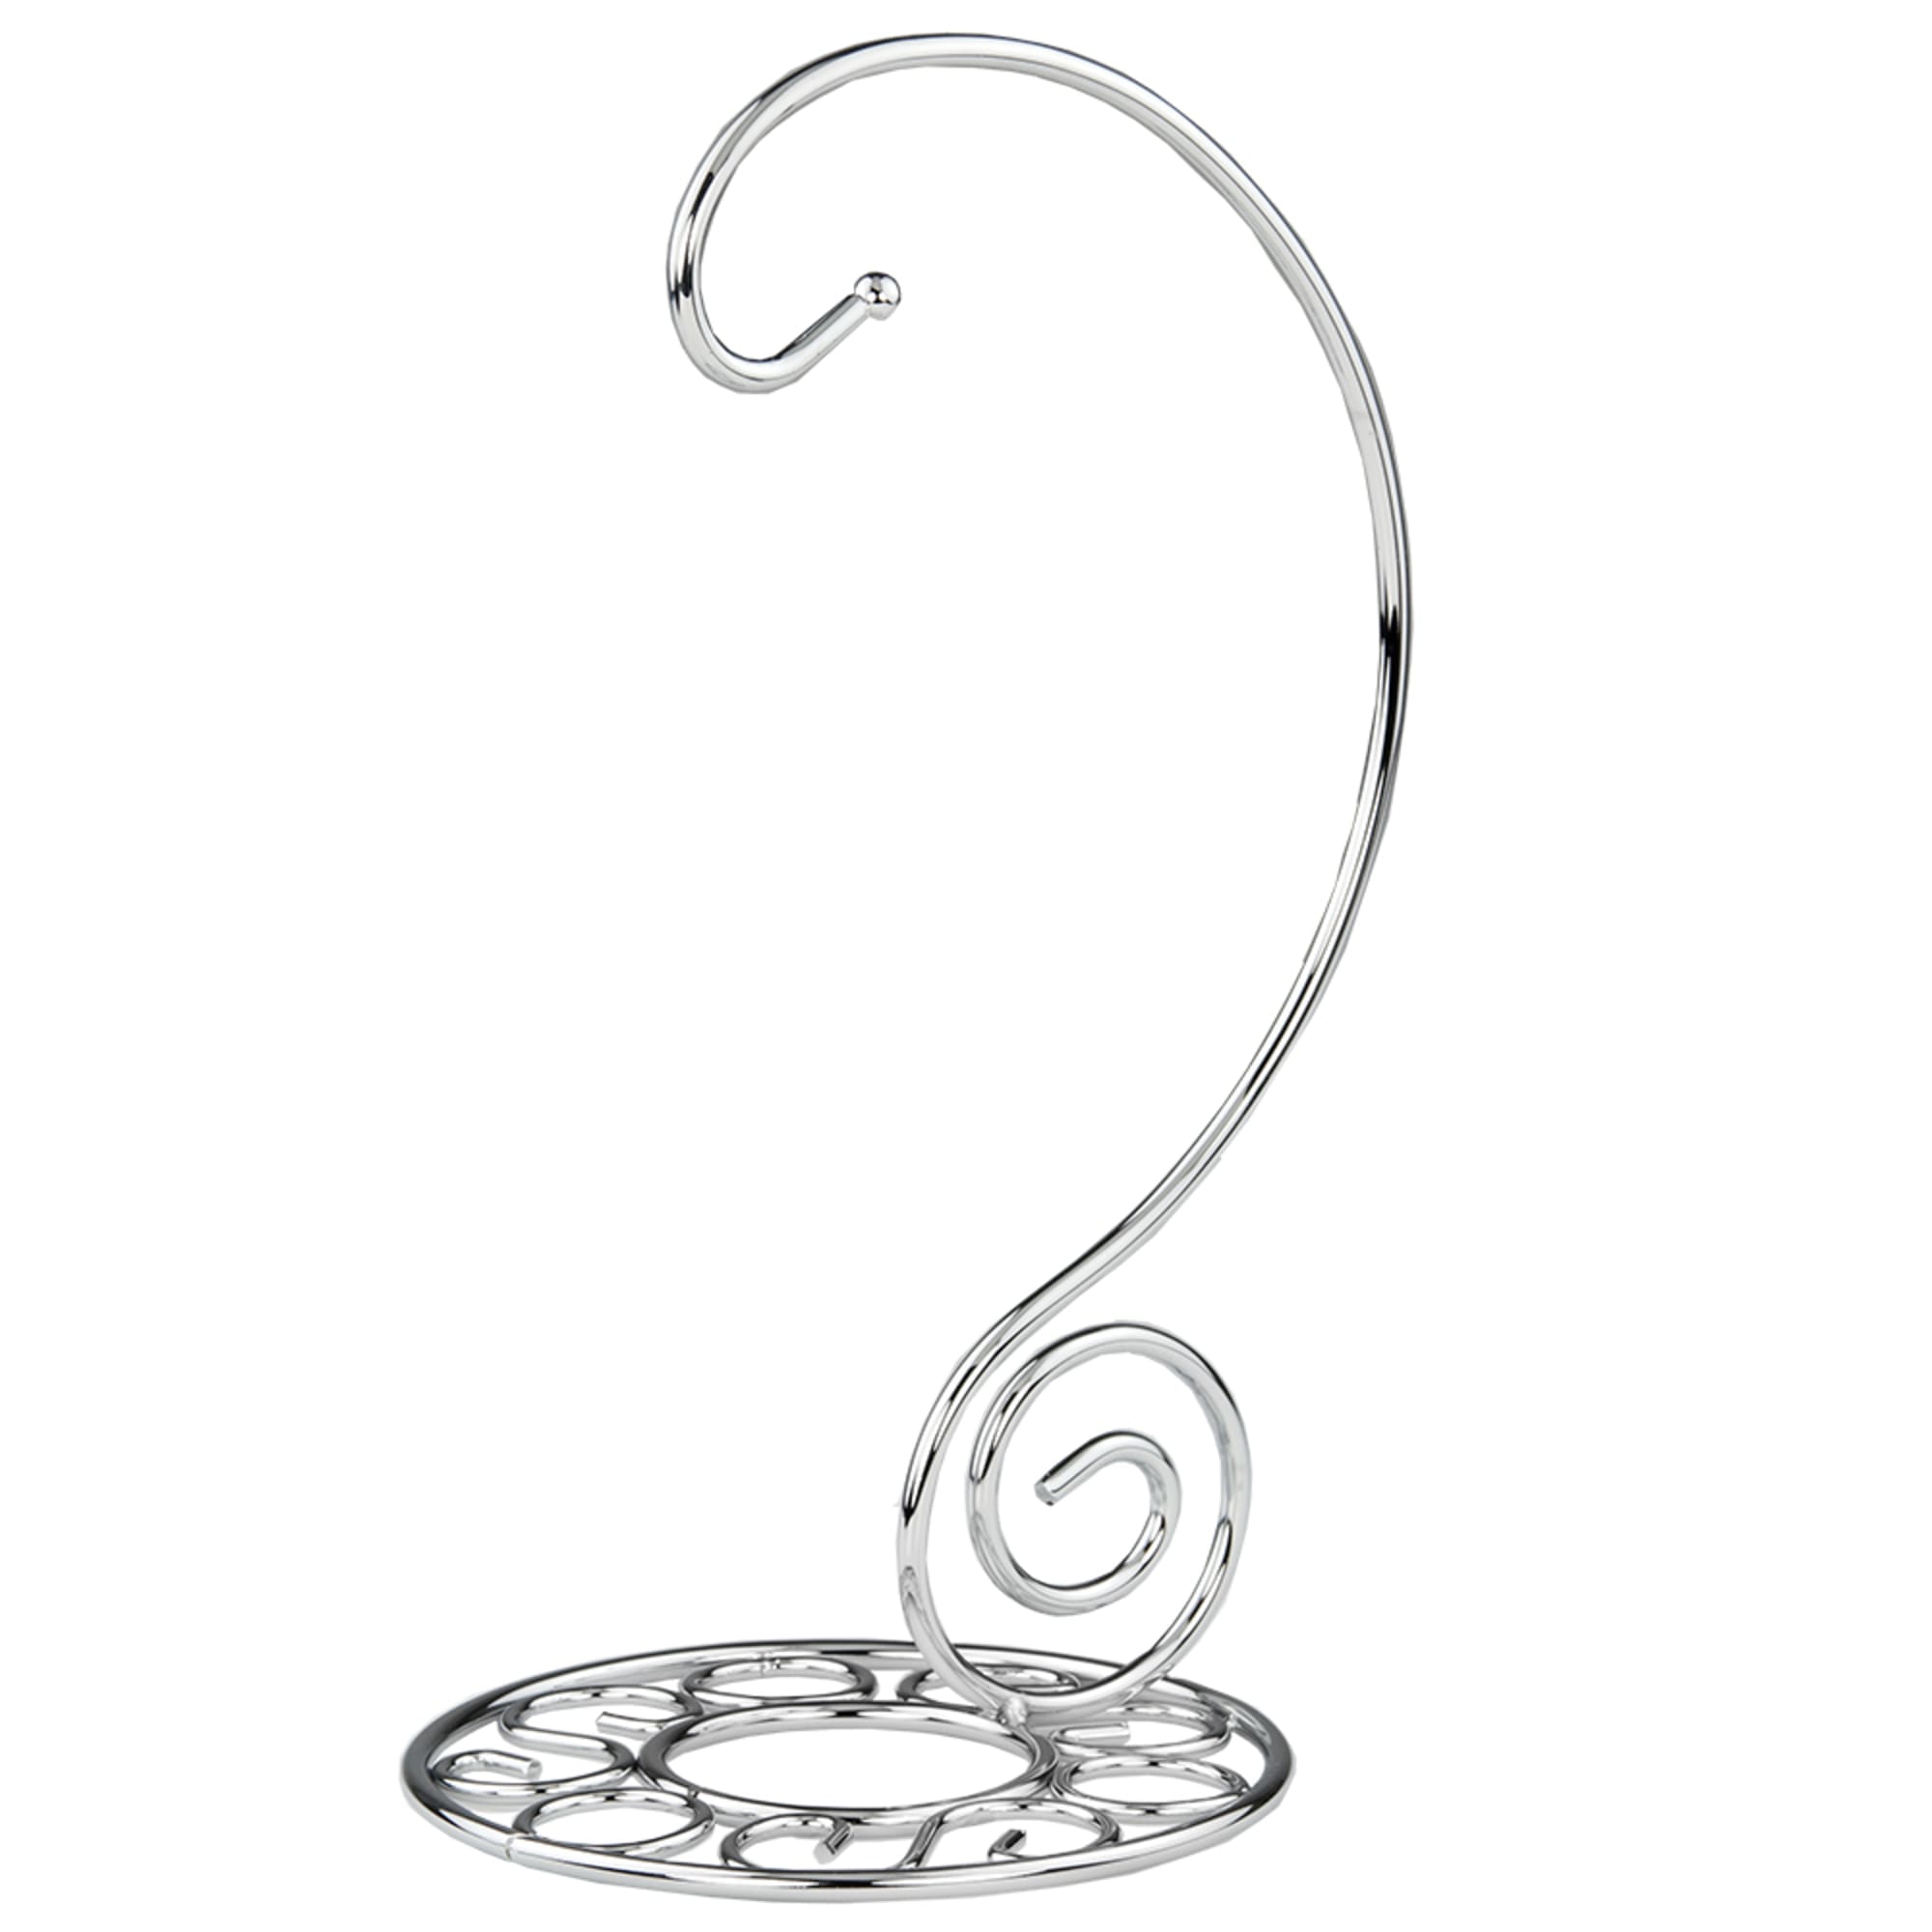 Home Basics Chrome Plated Steel Scroll Collection Banana Holder $5.00 EACH, CASE PACK OF 12